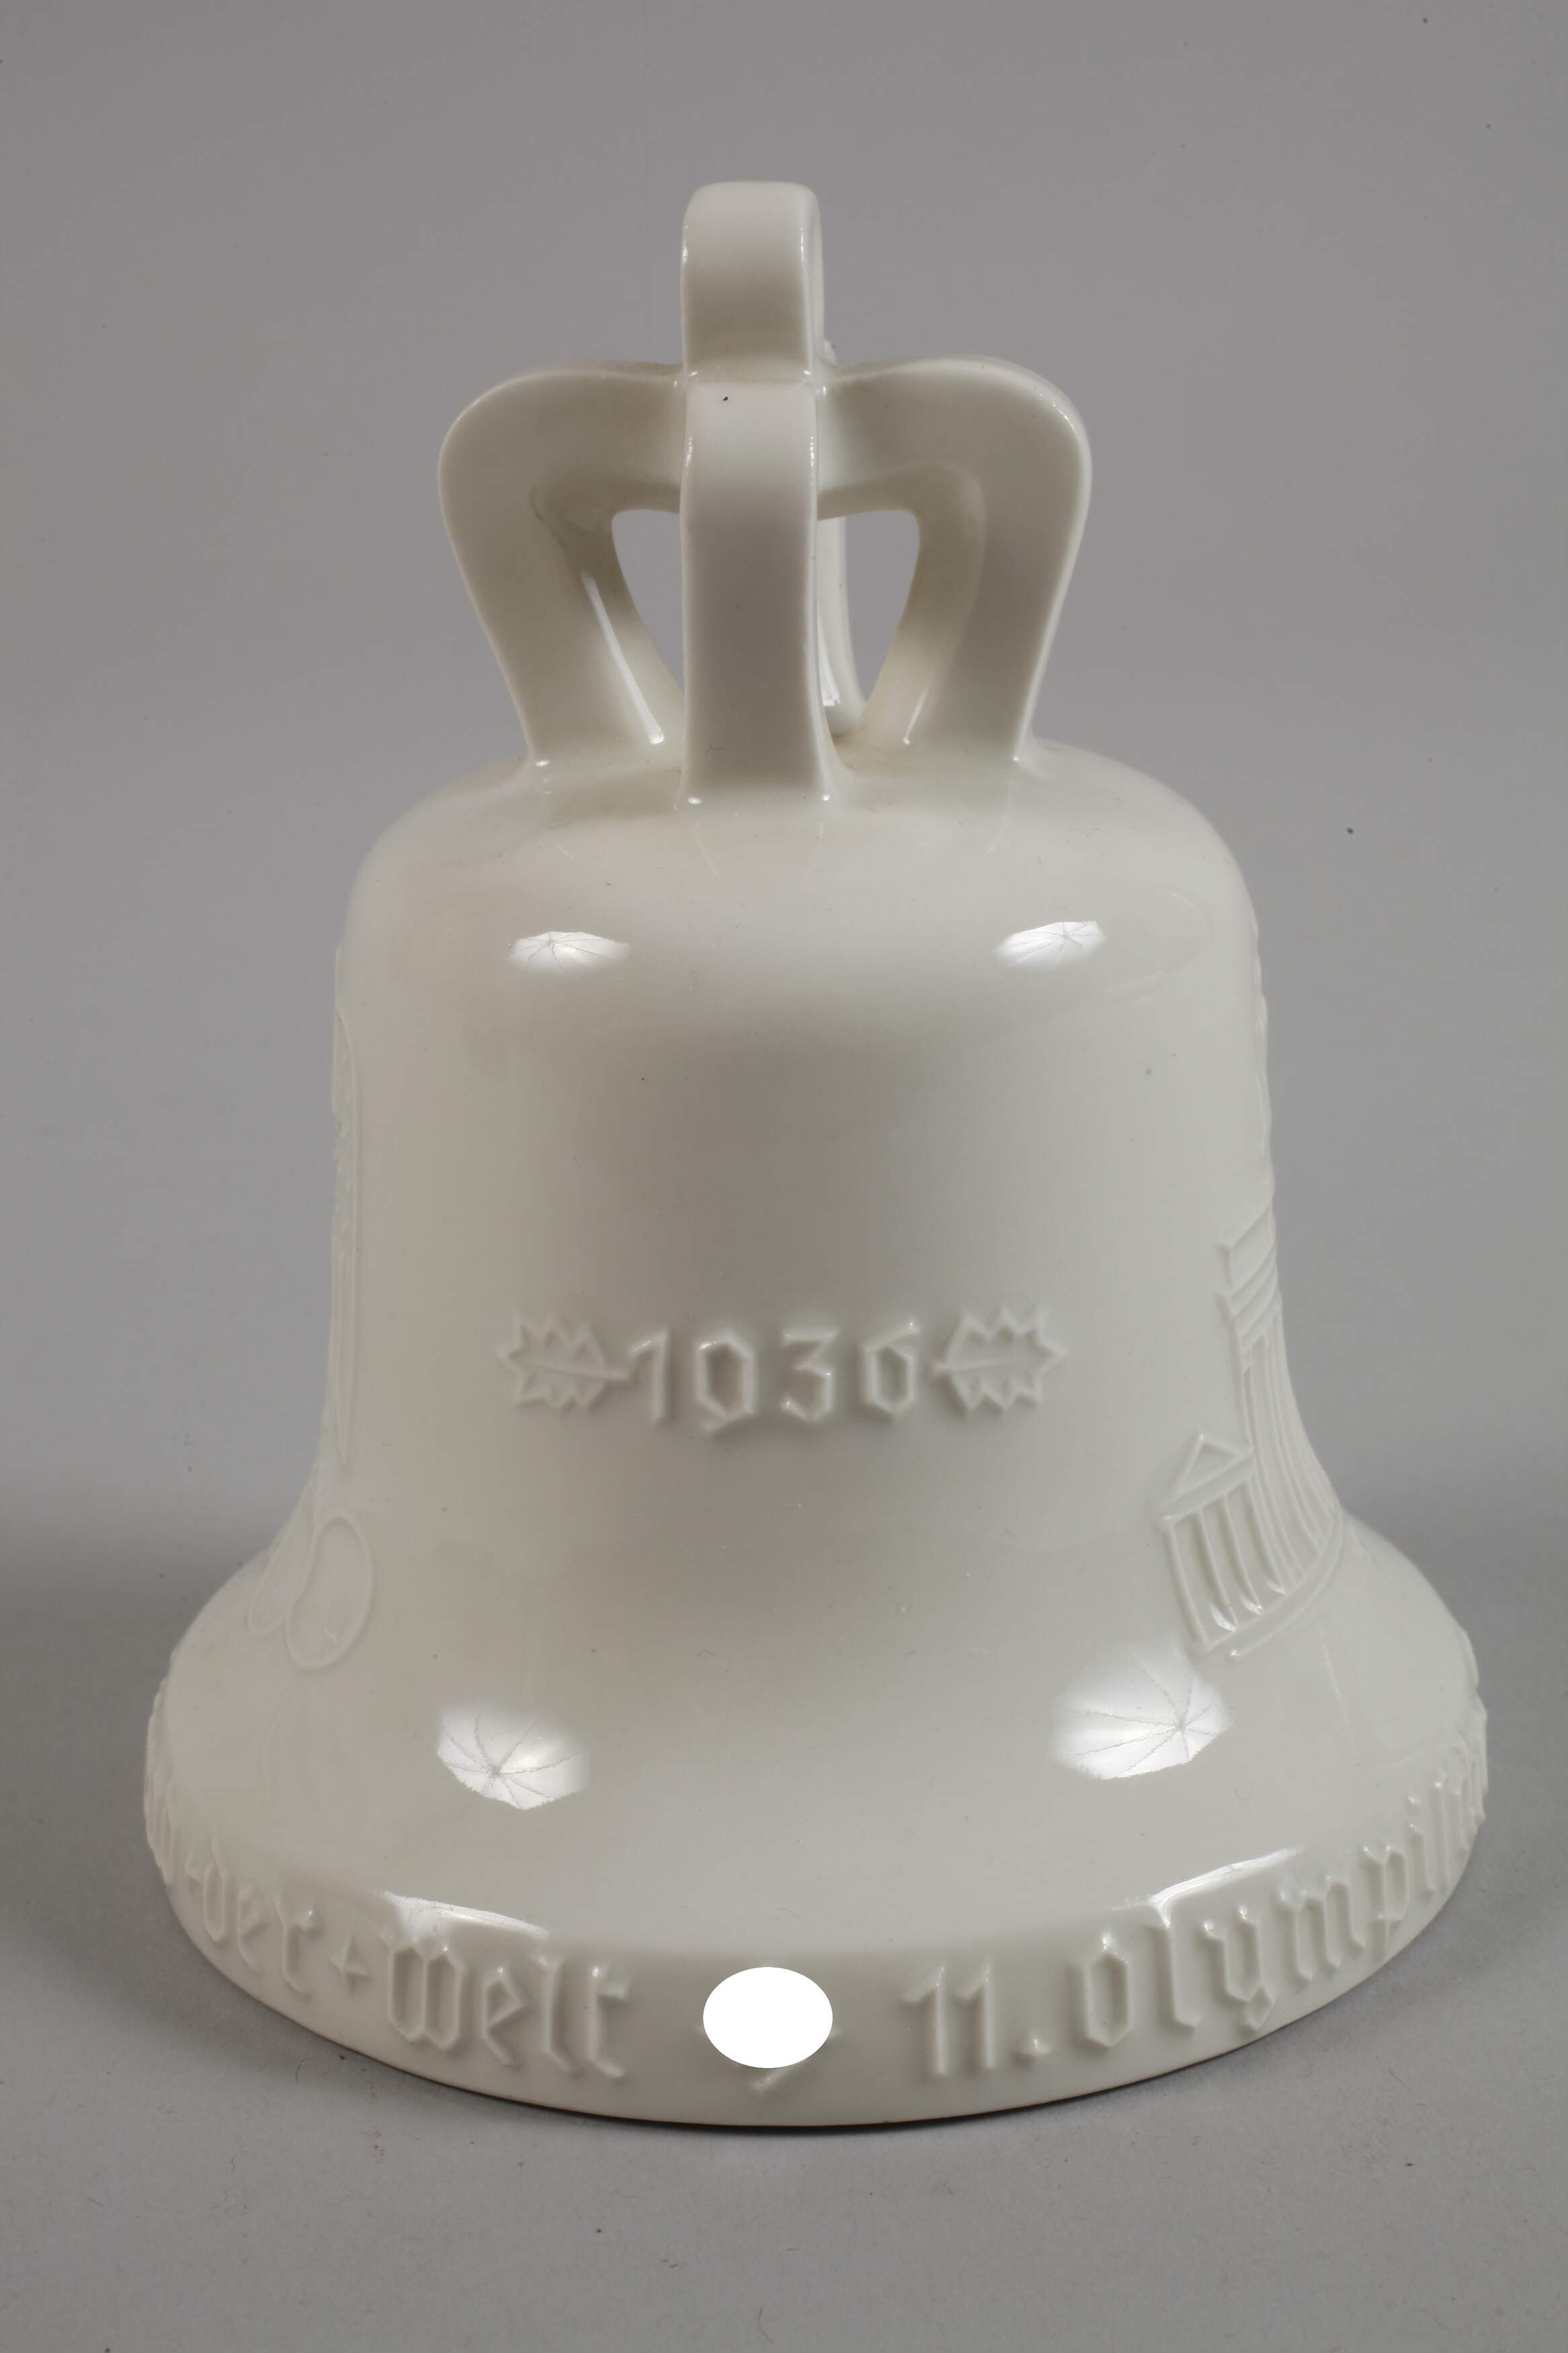 Porcelain bell Olympia 1936 with stand - Image 2 of 6